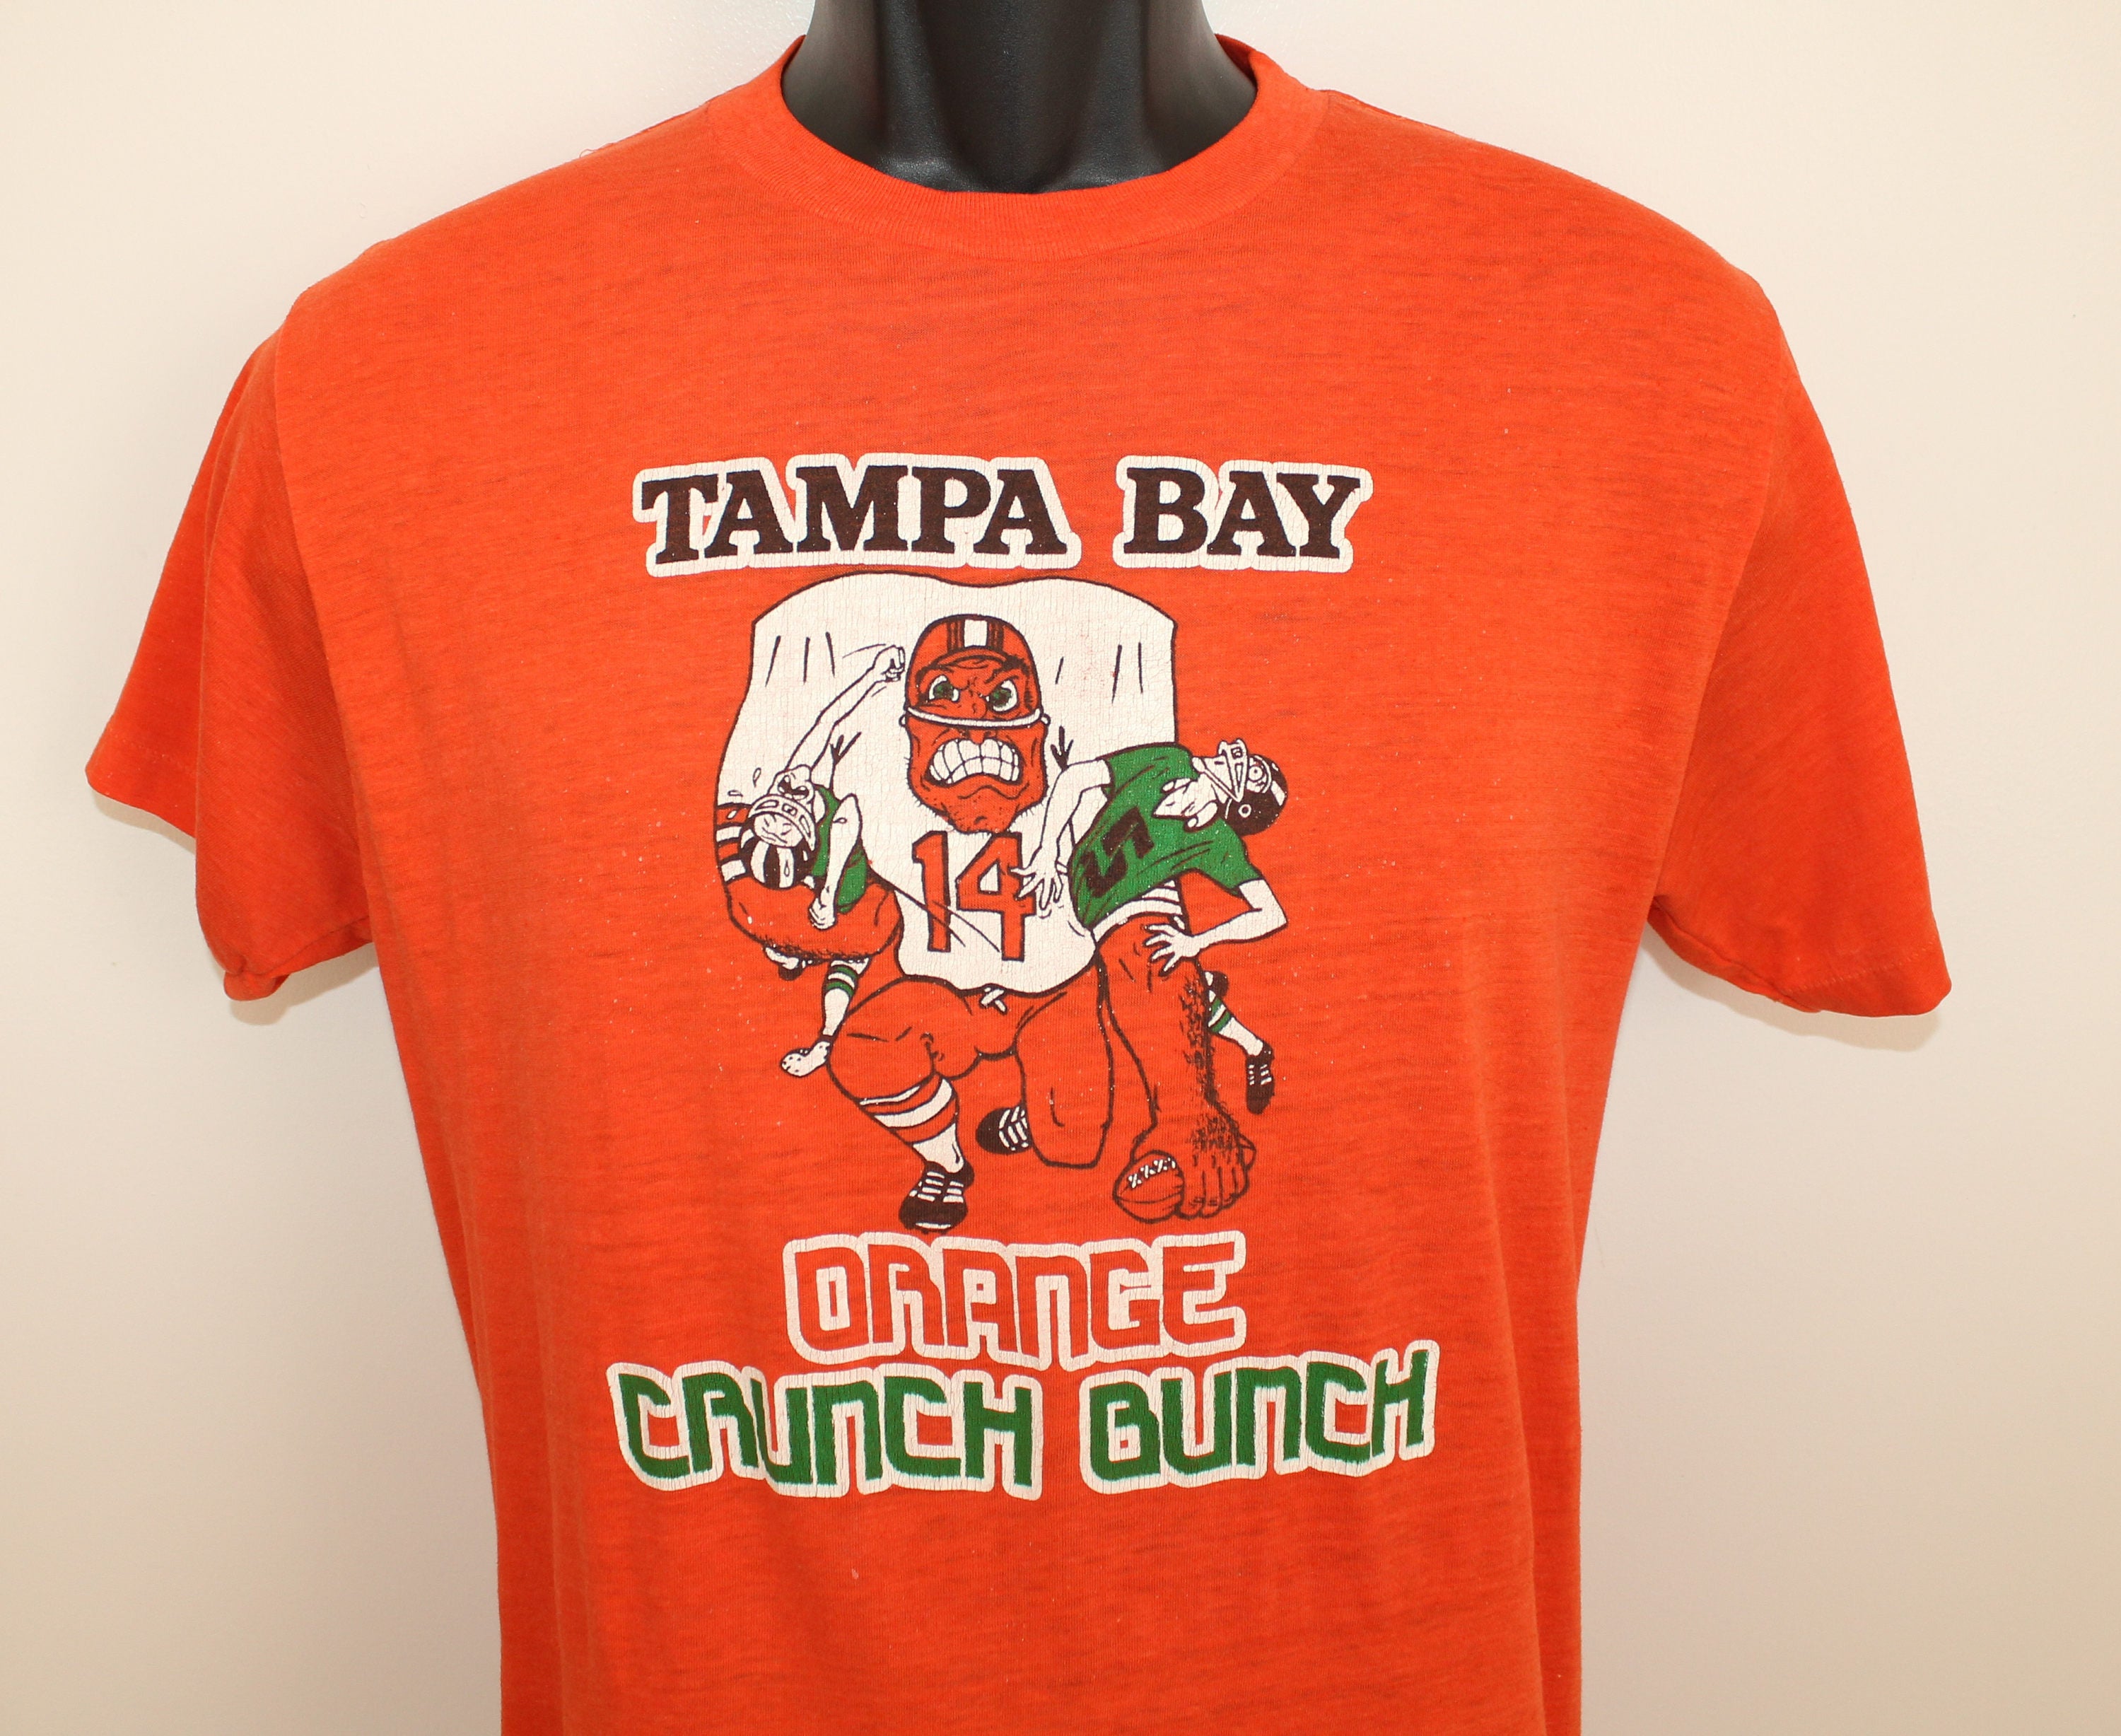 PreserveVintage Tampa Bay Buccaneers Orange Crunch Bunch Vintage T-Shirt S/M 70s 80s NFL Football Soft Thin Stretchy